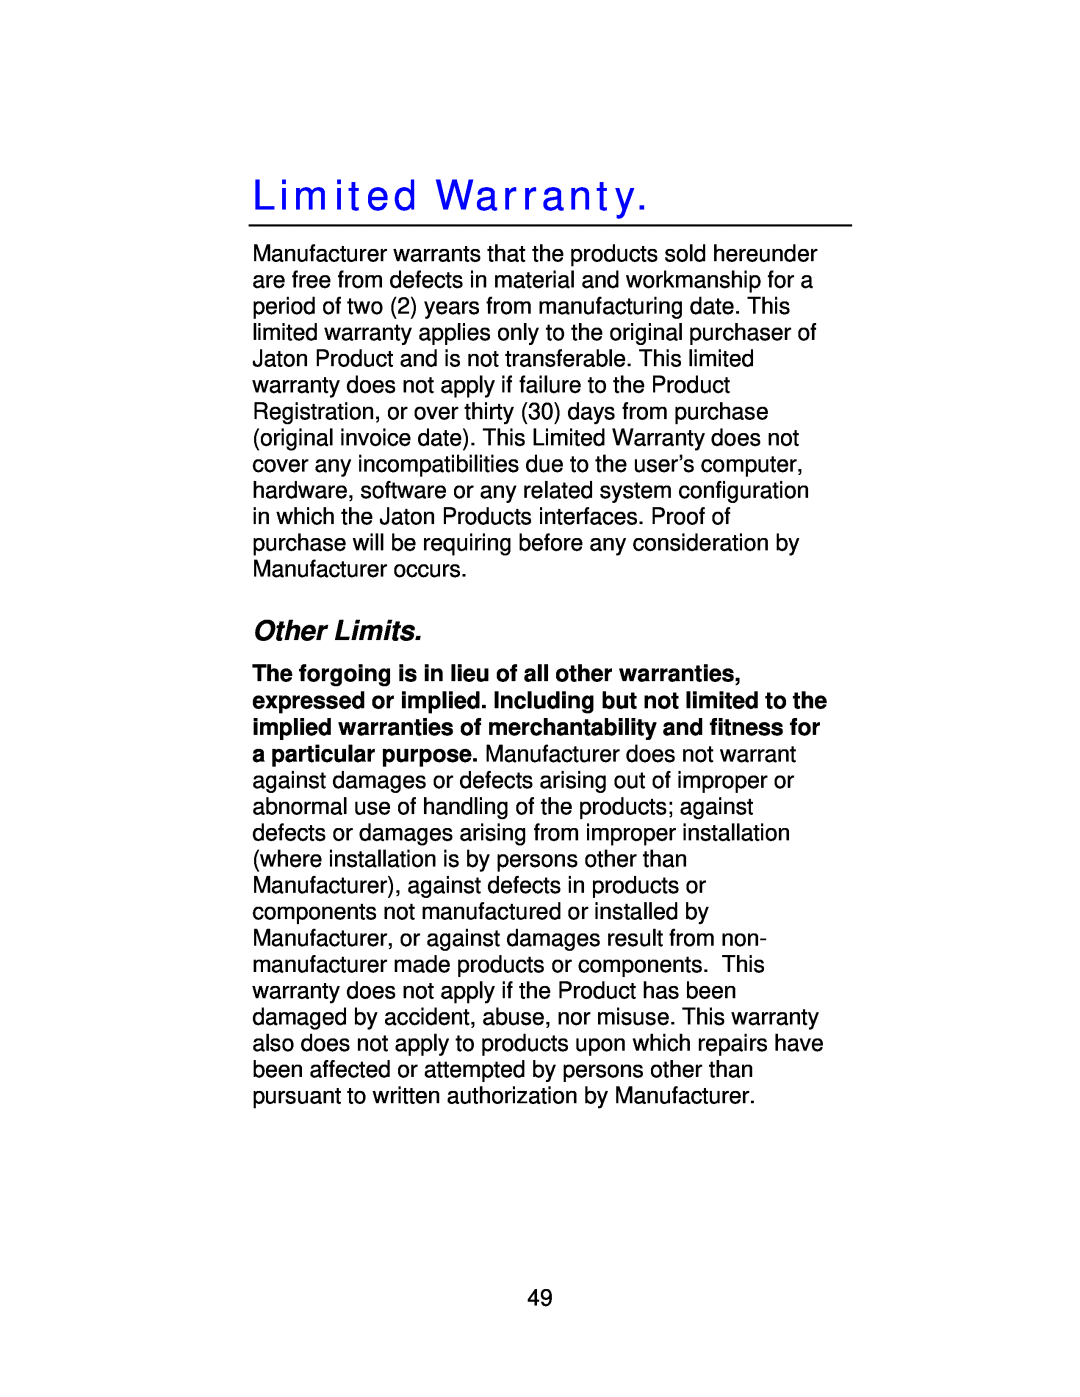 Jaton 5200 user manual Limited Warranty, Other Limits 